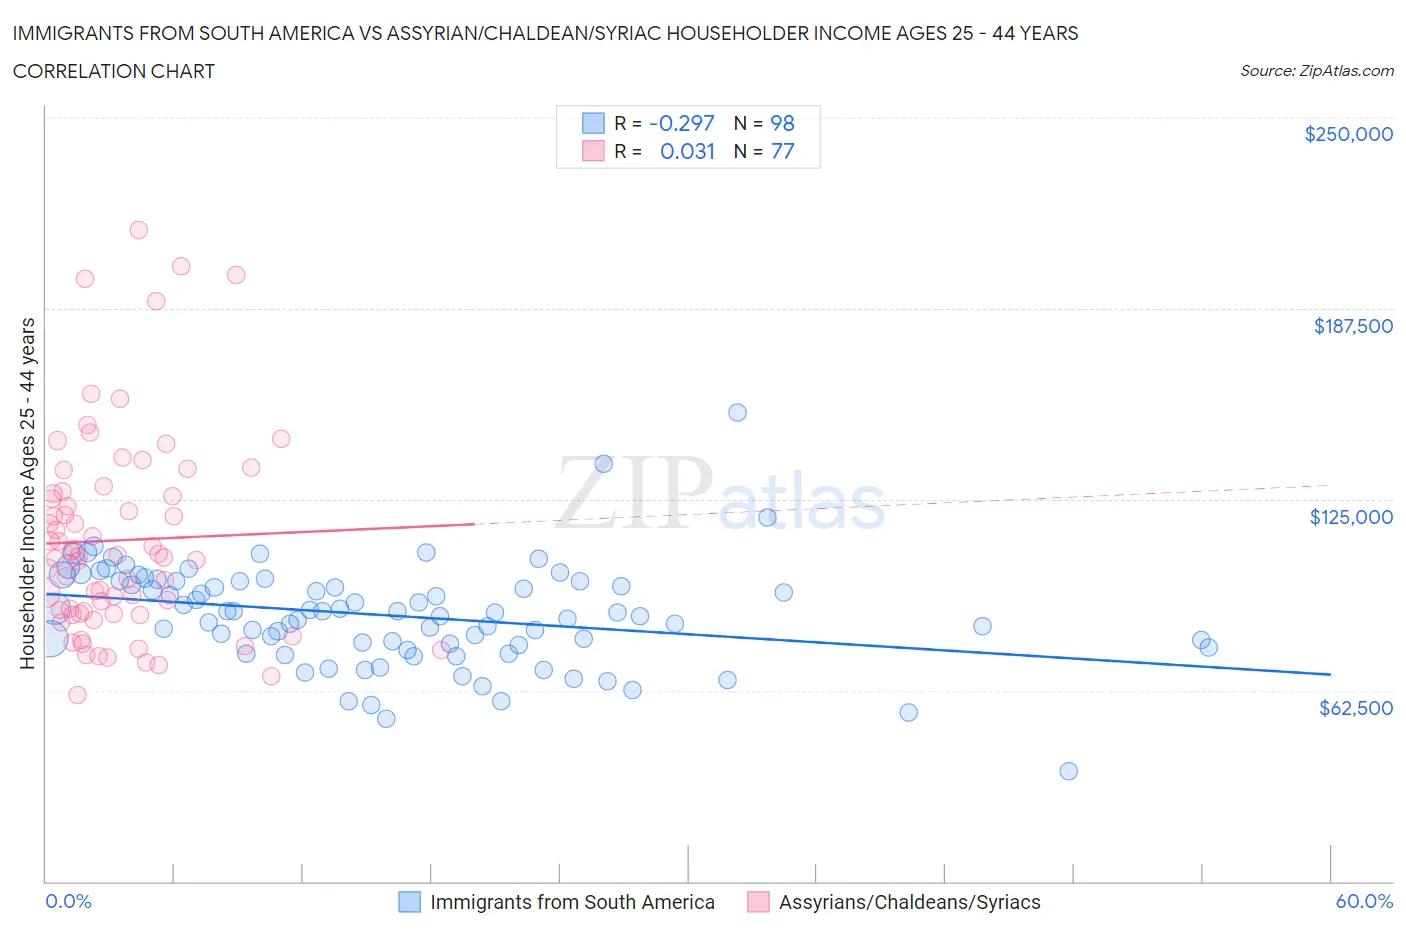 Immigrants from South America vs Assyrian/Chaldean/Syriac Householder Income Ages 25 - 44 years